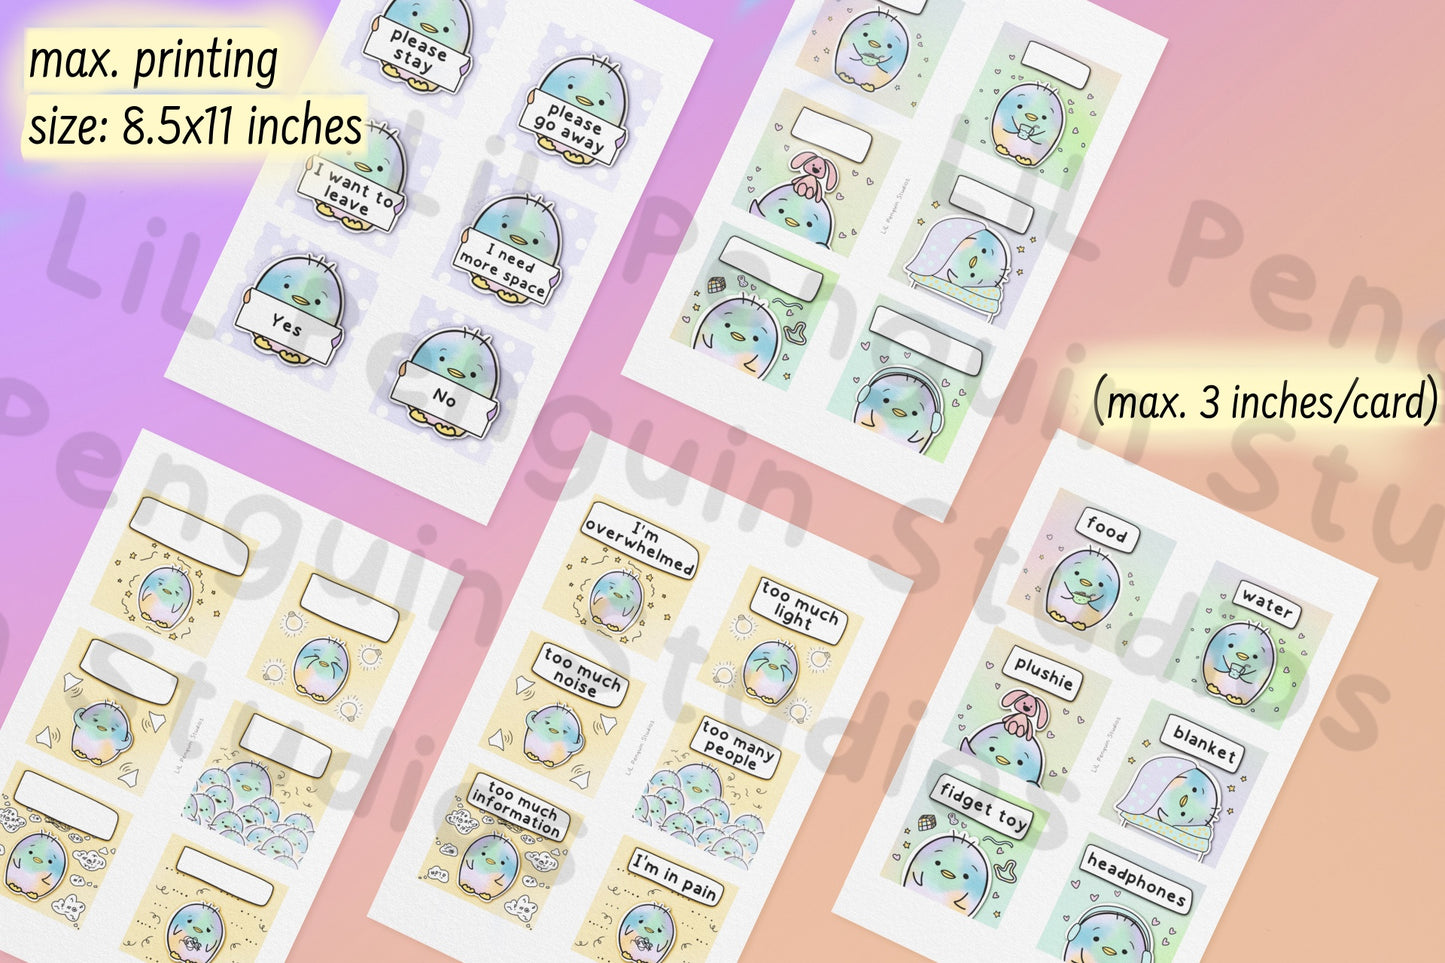 Affirmation and Communication Cards Bundle - Private Practice Use